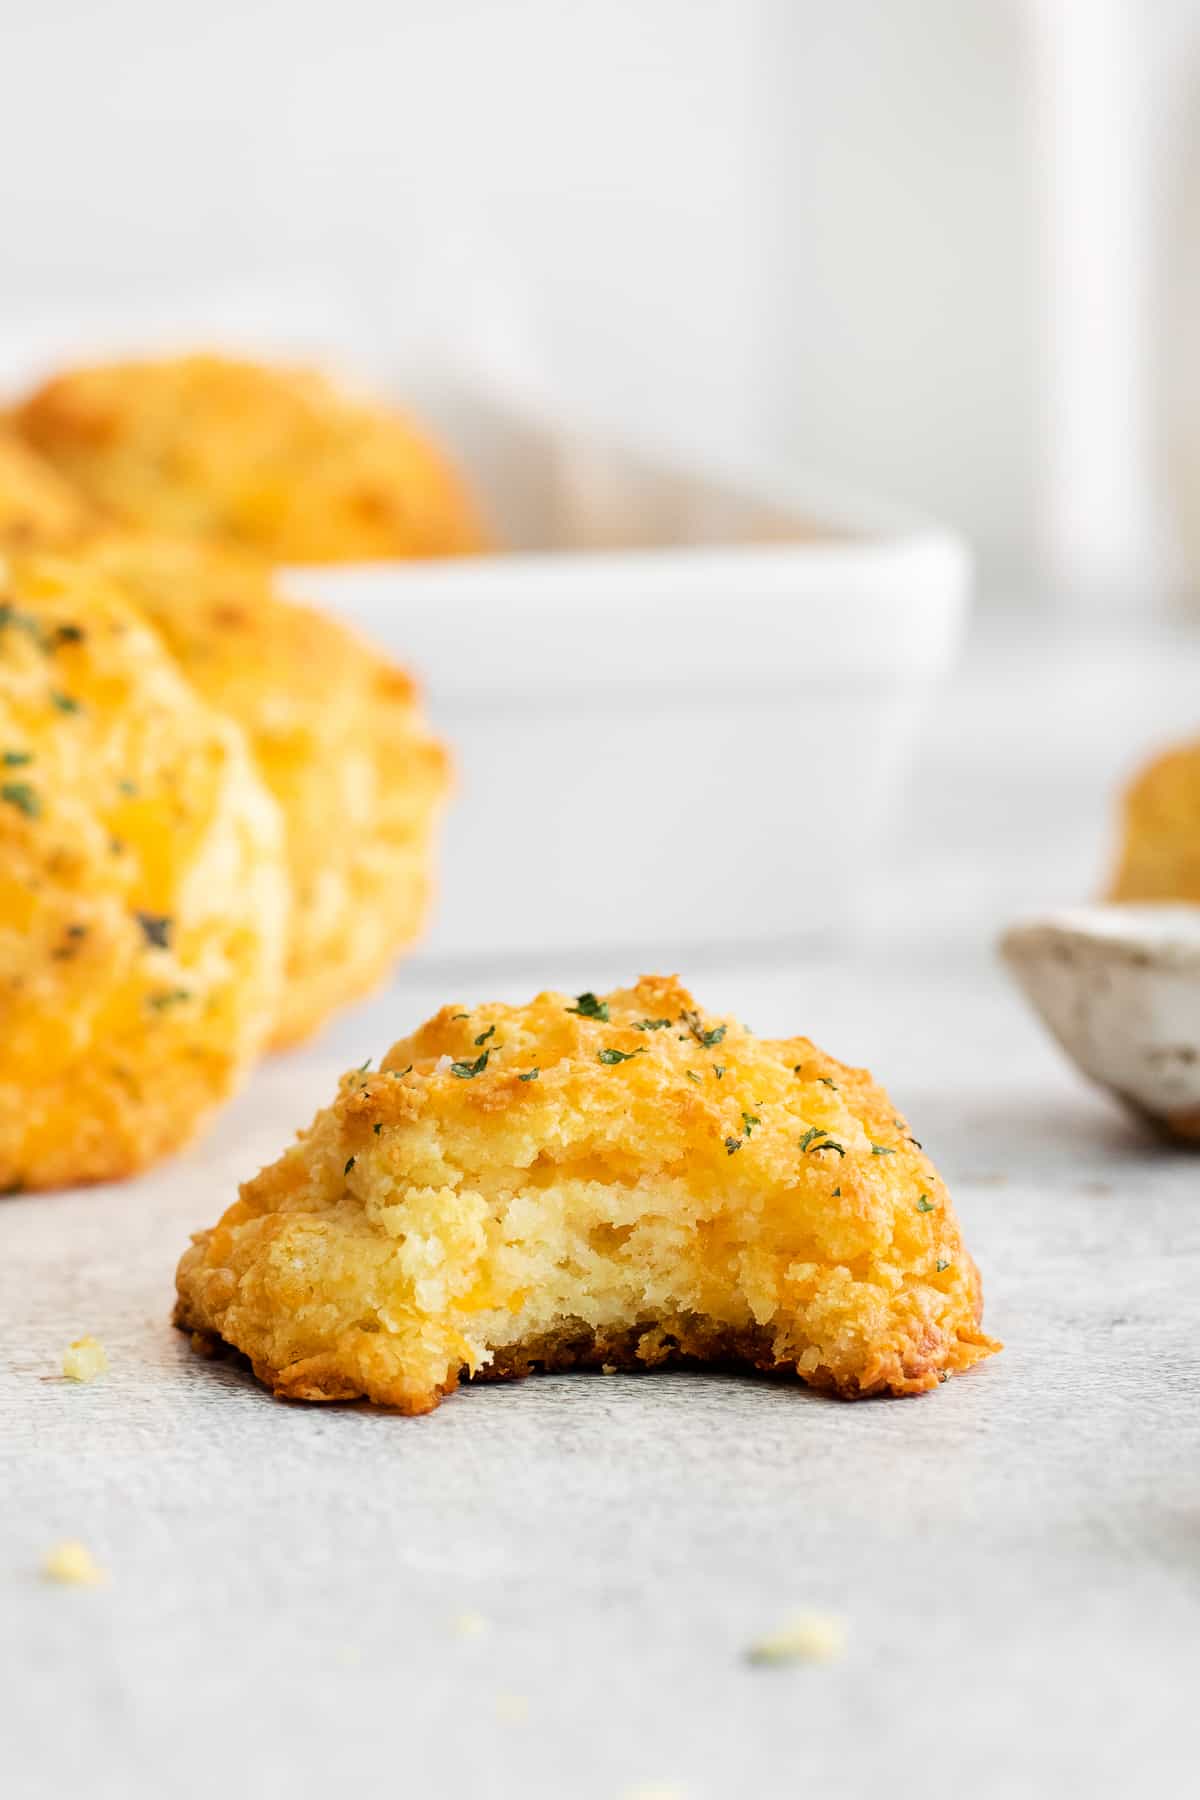 Red lobster cheddar biscuit with a bite taken out of it.